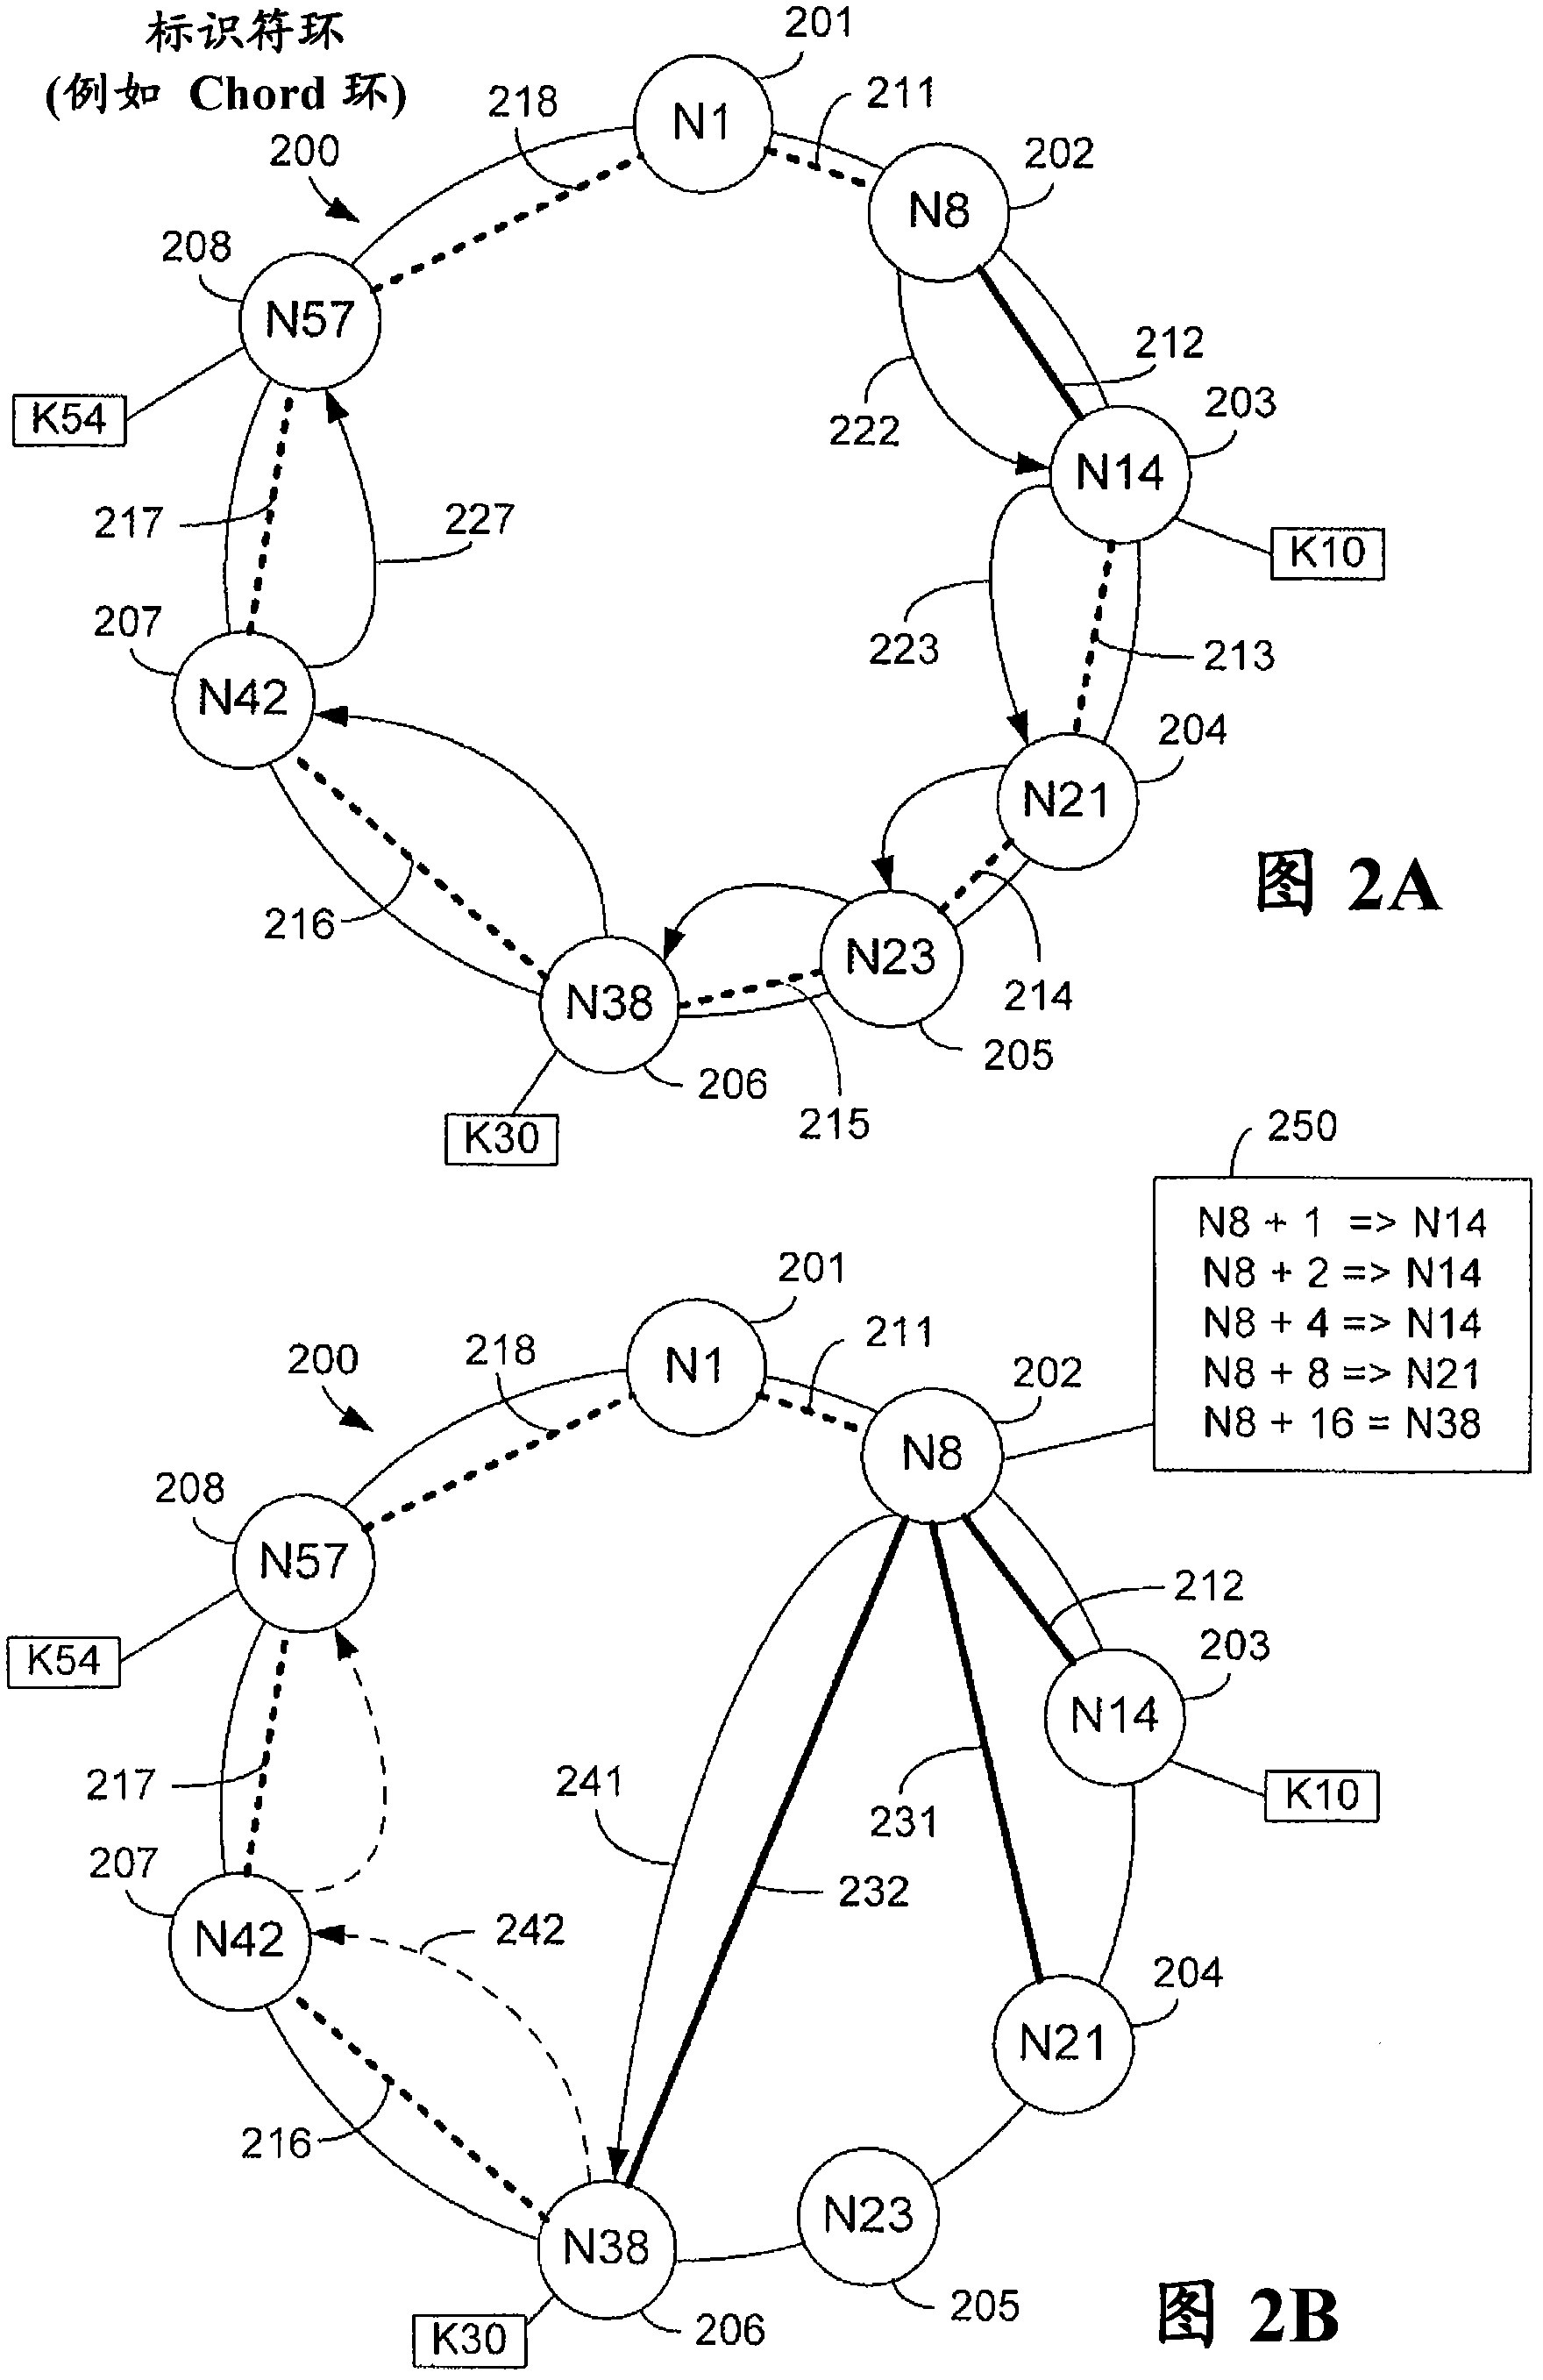 Method and arrangement for locating services in a peer-to-peer network